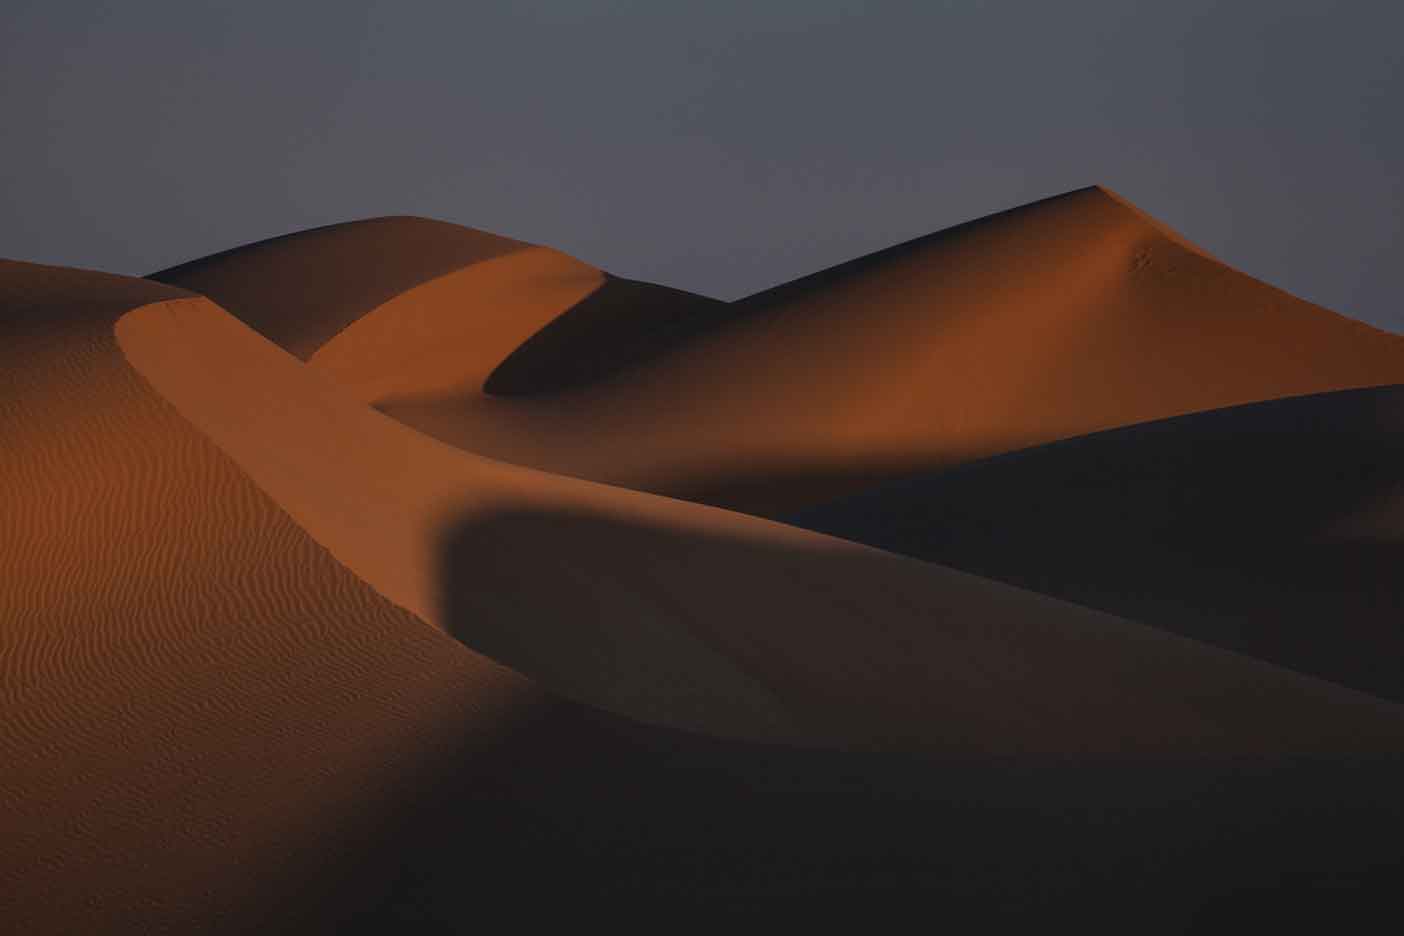 Imperial Sand Dunes (Agodones Dunes) in the desert of Southern California